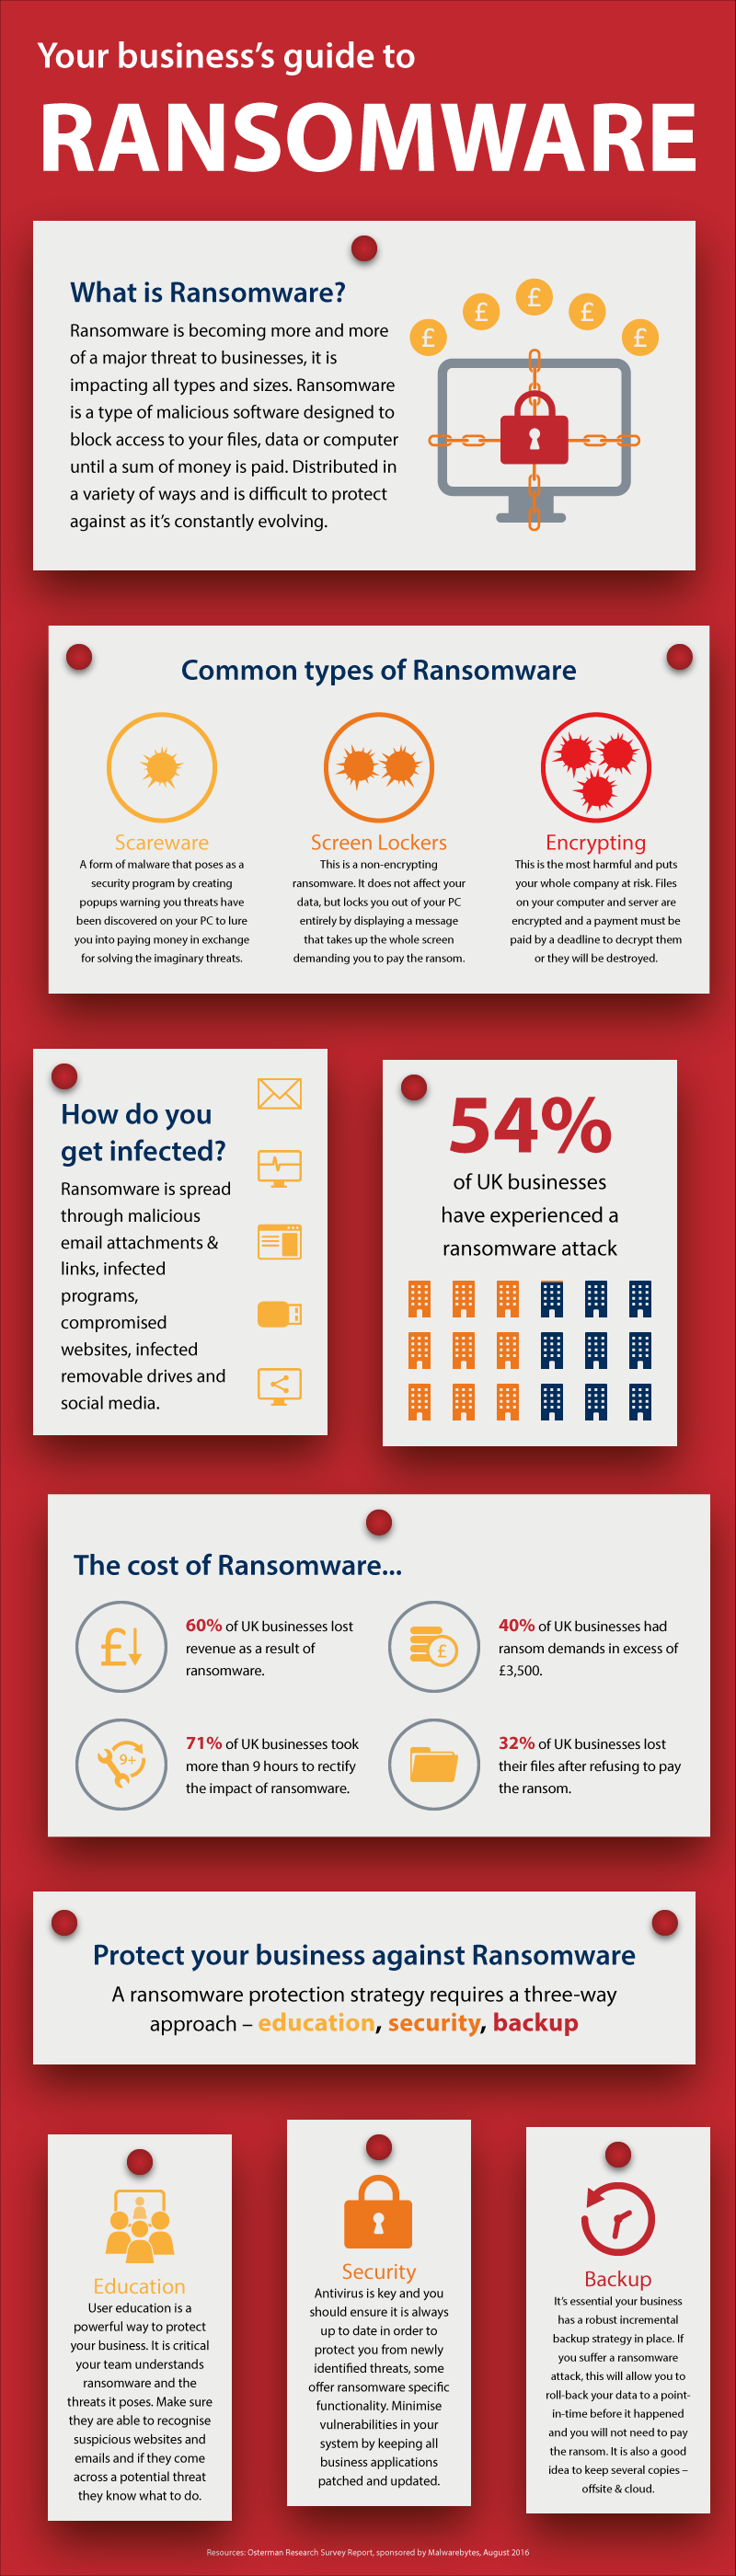 your business guide to ransomware infographic